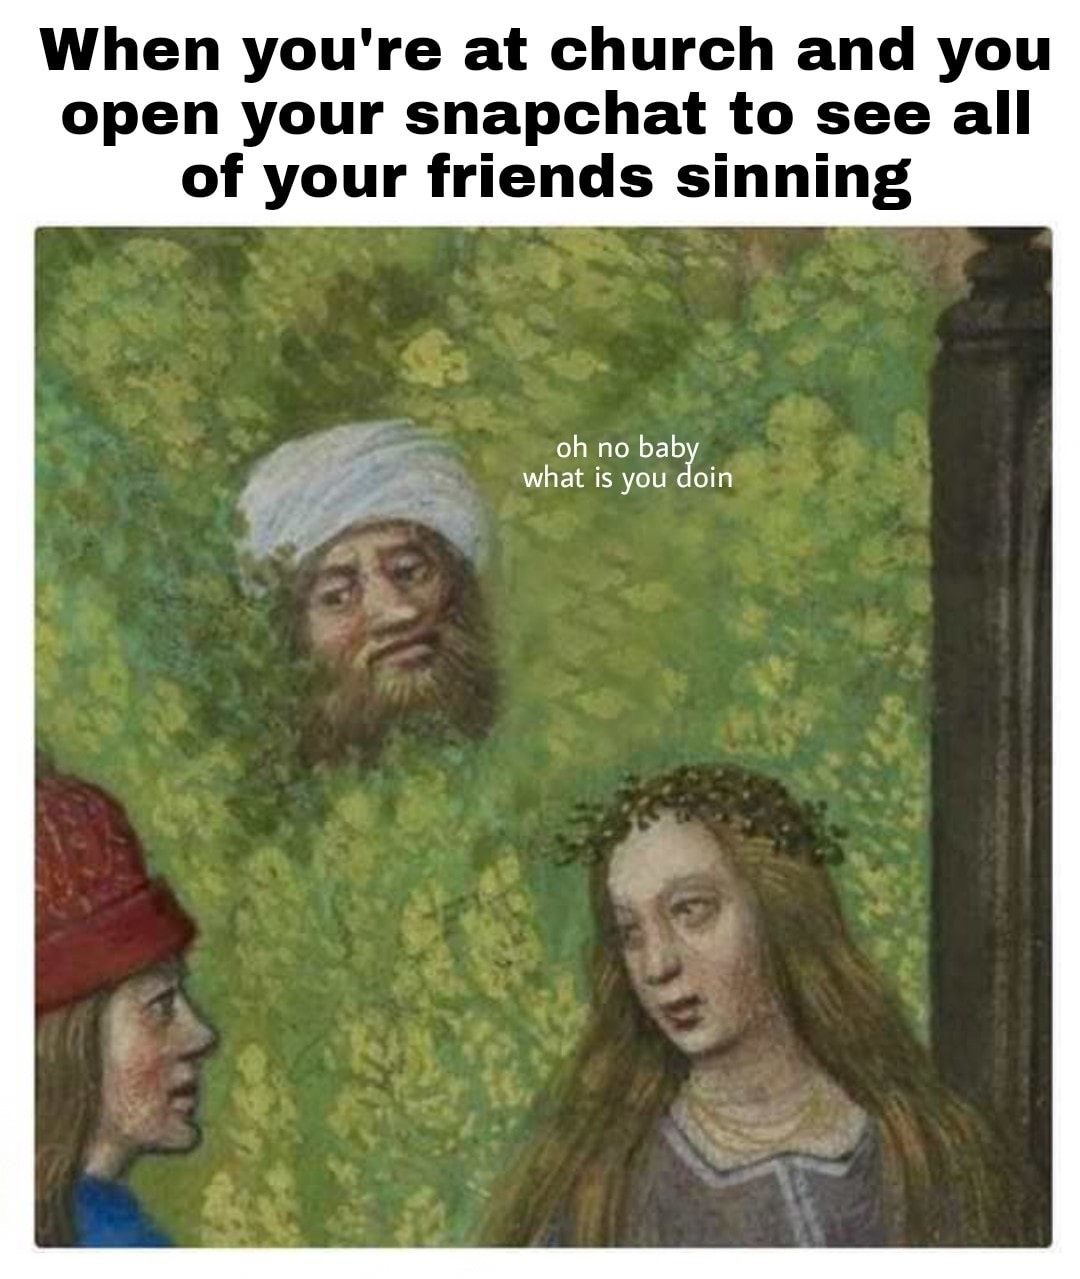 memes - funny medieval painting - When you're at church and you open your snapchat to see all of your friends sinning oh no baby what is you doin